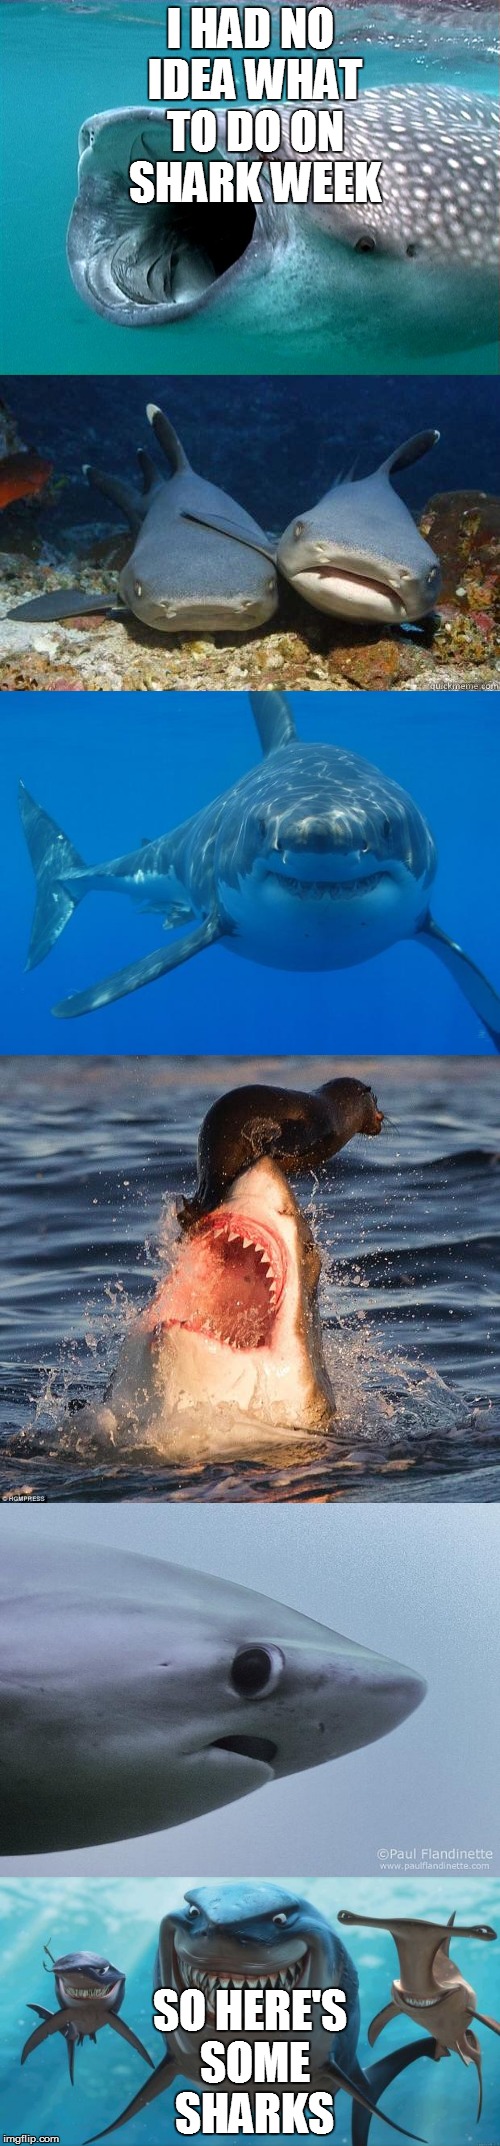 shark week | I HAD NO IDEA WHAT TO DO ON SHARK WEEK; SO HERE'S SOME SHARKS | image tagged in shark week,whale shark,nurse sharks,shark,sharks | made w/ Imgflip meme maker